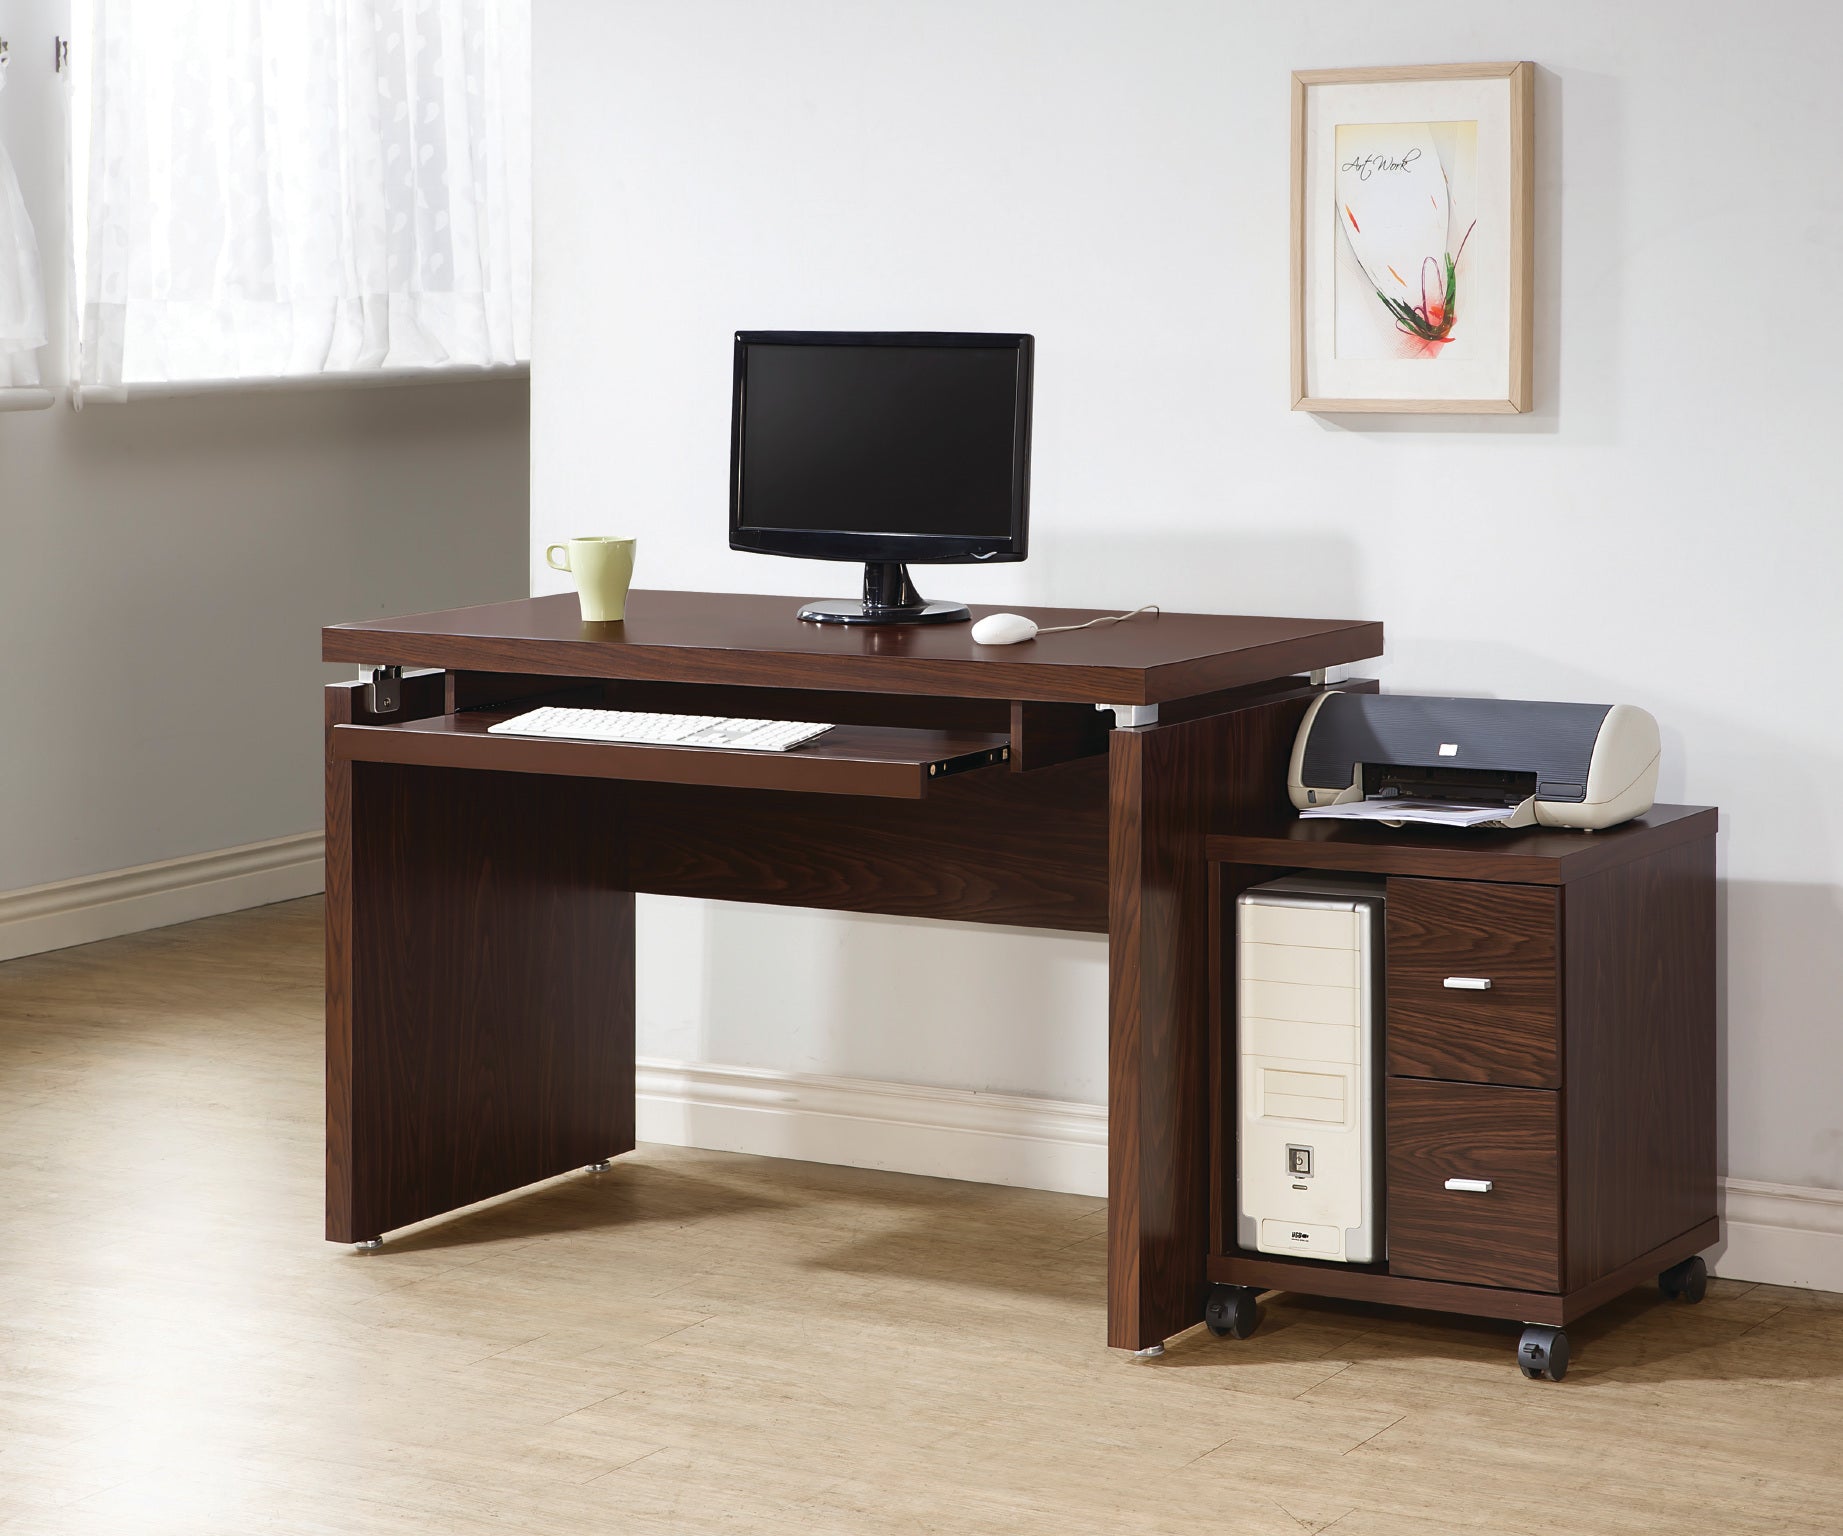 OF6386 - Office Desk and Mobile CPU Stand